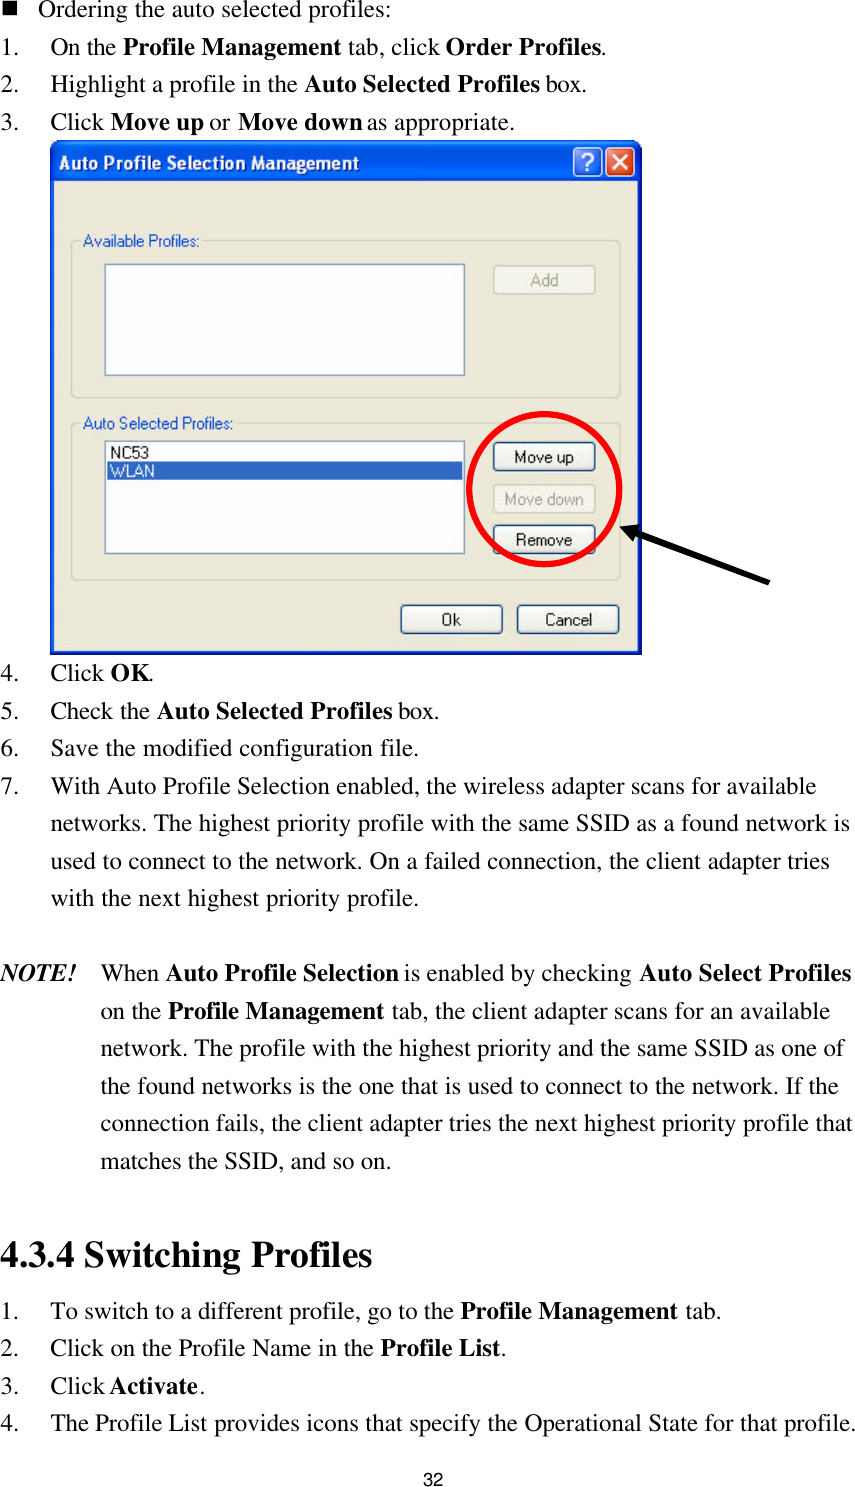 32 n Ordering the auto selected profiles: 1. On the Profile Management tab, click Order Profiles. 2. Highlight a profile in the Auto Selected Profiles box. 3. Click Move up or Move down as appropriate.  4. Click OK. 5. Check the Auto Selected Profiles box. 6. Save the modified configuration file. 7. With Auto Profile Selection enabled, the wireless adapter scans for available networks. The highest priority profile with the same SSID as a found network is used to connect to the network. On a failed connection, the client adapter tries with the next highest priority profile.  NOTE! When Auto Profile Selection is enabled by checking Auto Select Profiles on the Profile Management tab, the client adapter scans for an available network. The profile with the highest priority and the same SSID as one of the found networks is the one that is used to connect to the network. If the connection fails, the client adapter tries the next highest priority profile that matches the SSID, and so on.    4.3.4 Switching Profiles 1. To switch to a different profile, go to the Profile Management tab. 2. Click on the Profile Name in the Profile List. 3. Click Activate. 4. The Profile List provides icons that specify the Operational State for that profile. 